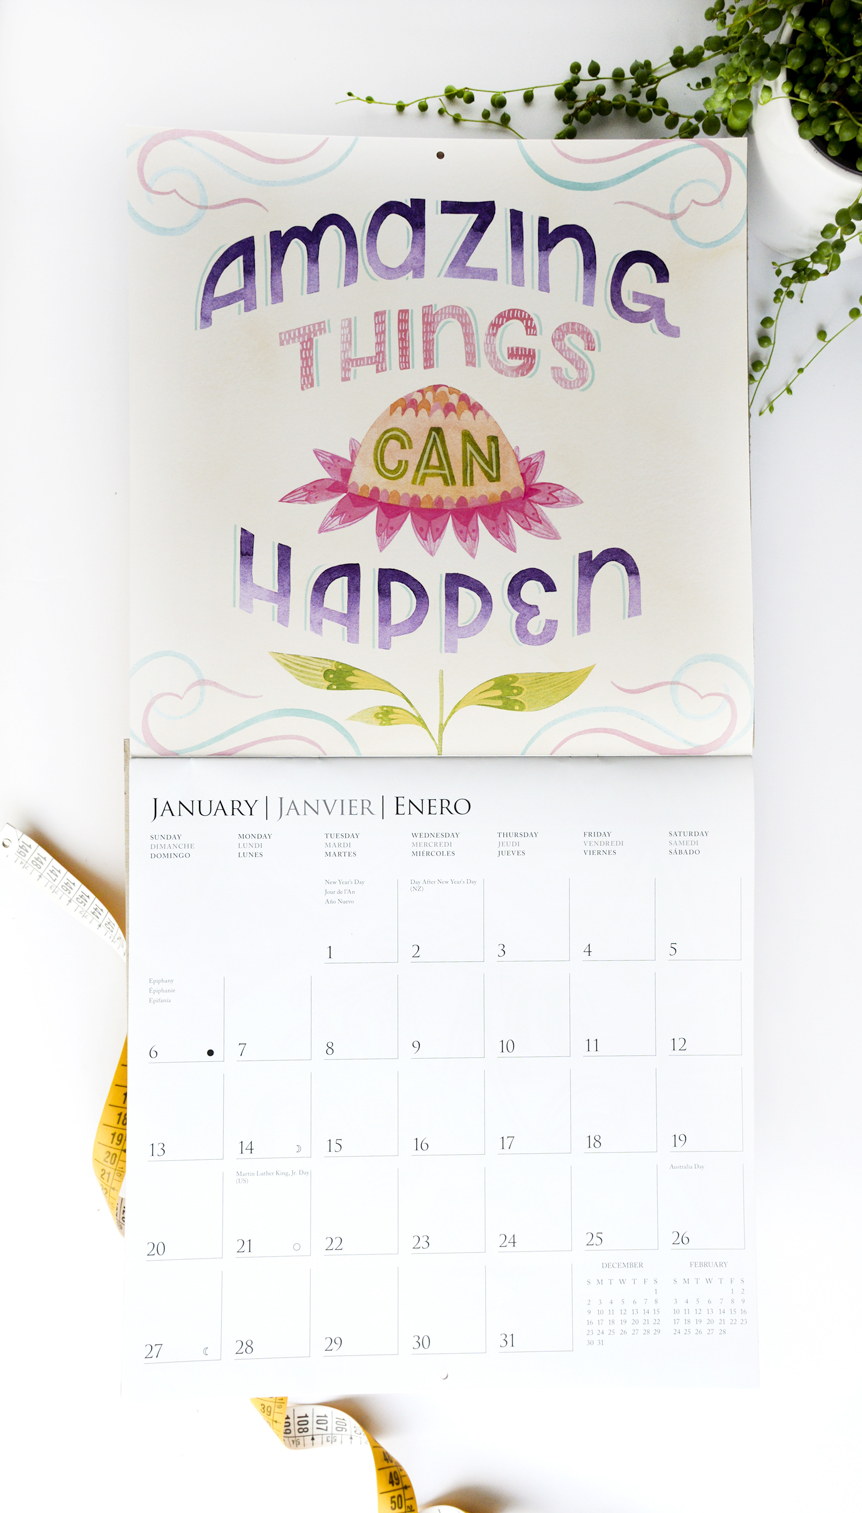 2019 Graphique De France "Live in This Moment" Calendar Illustrated by Becca Cahan